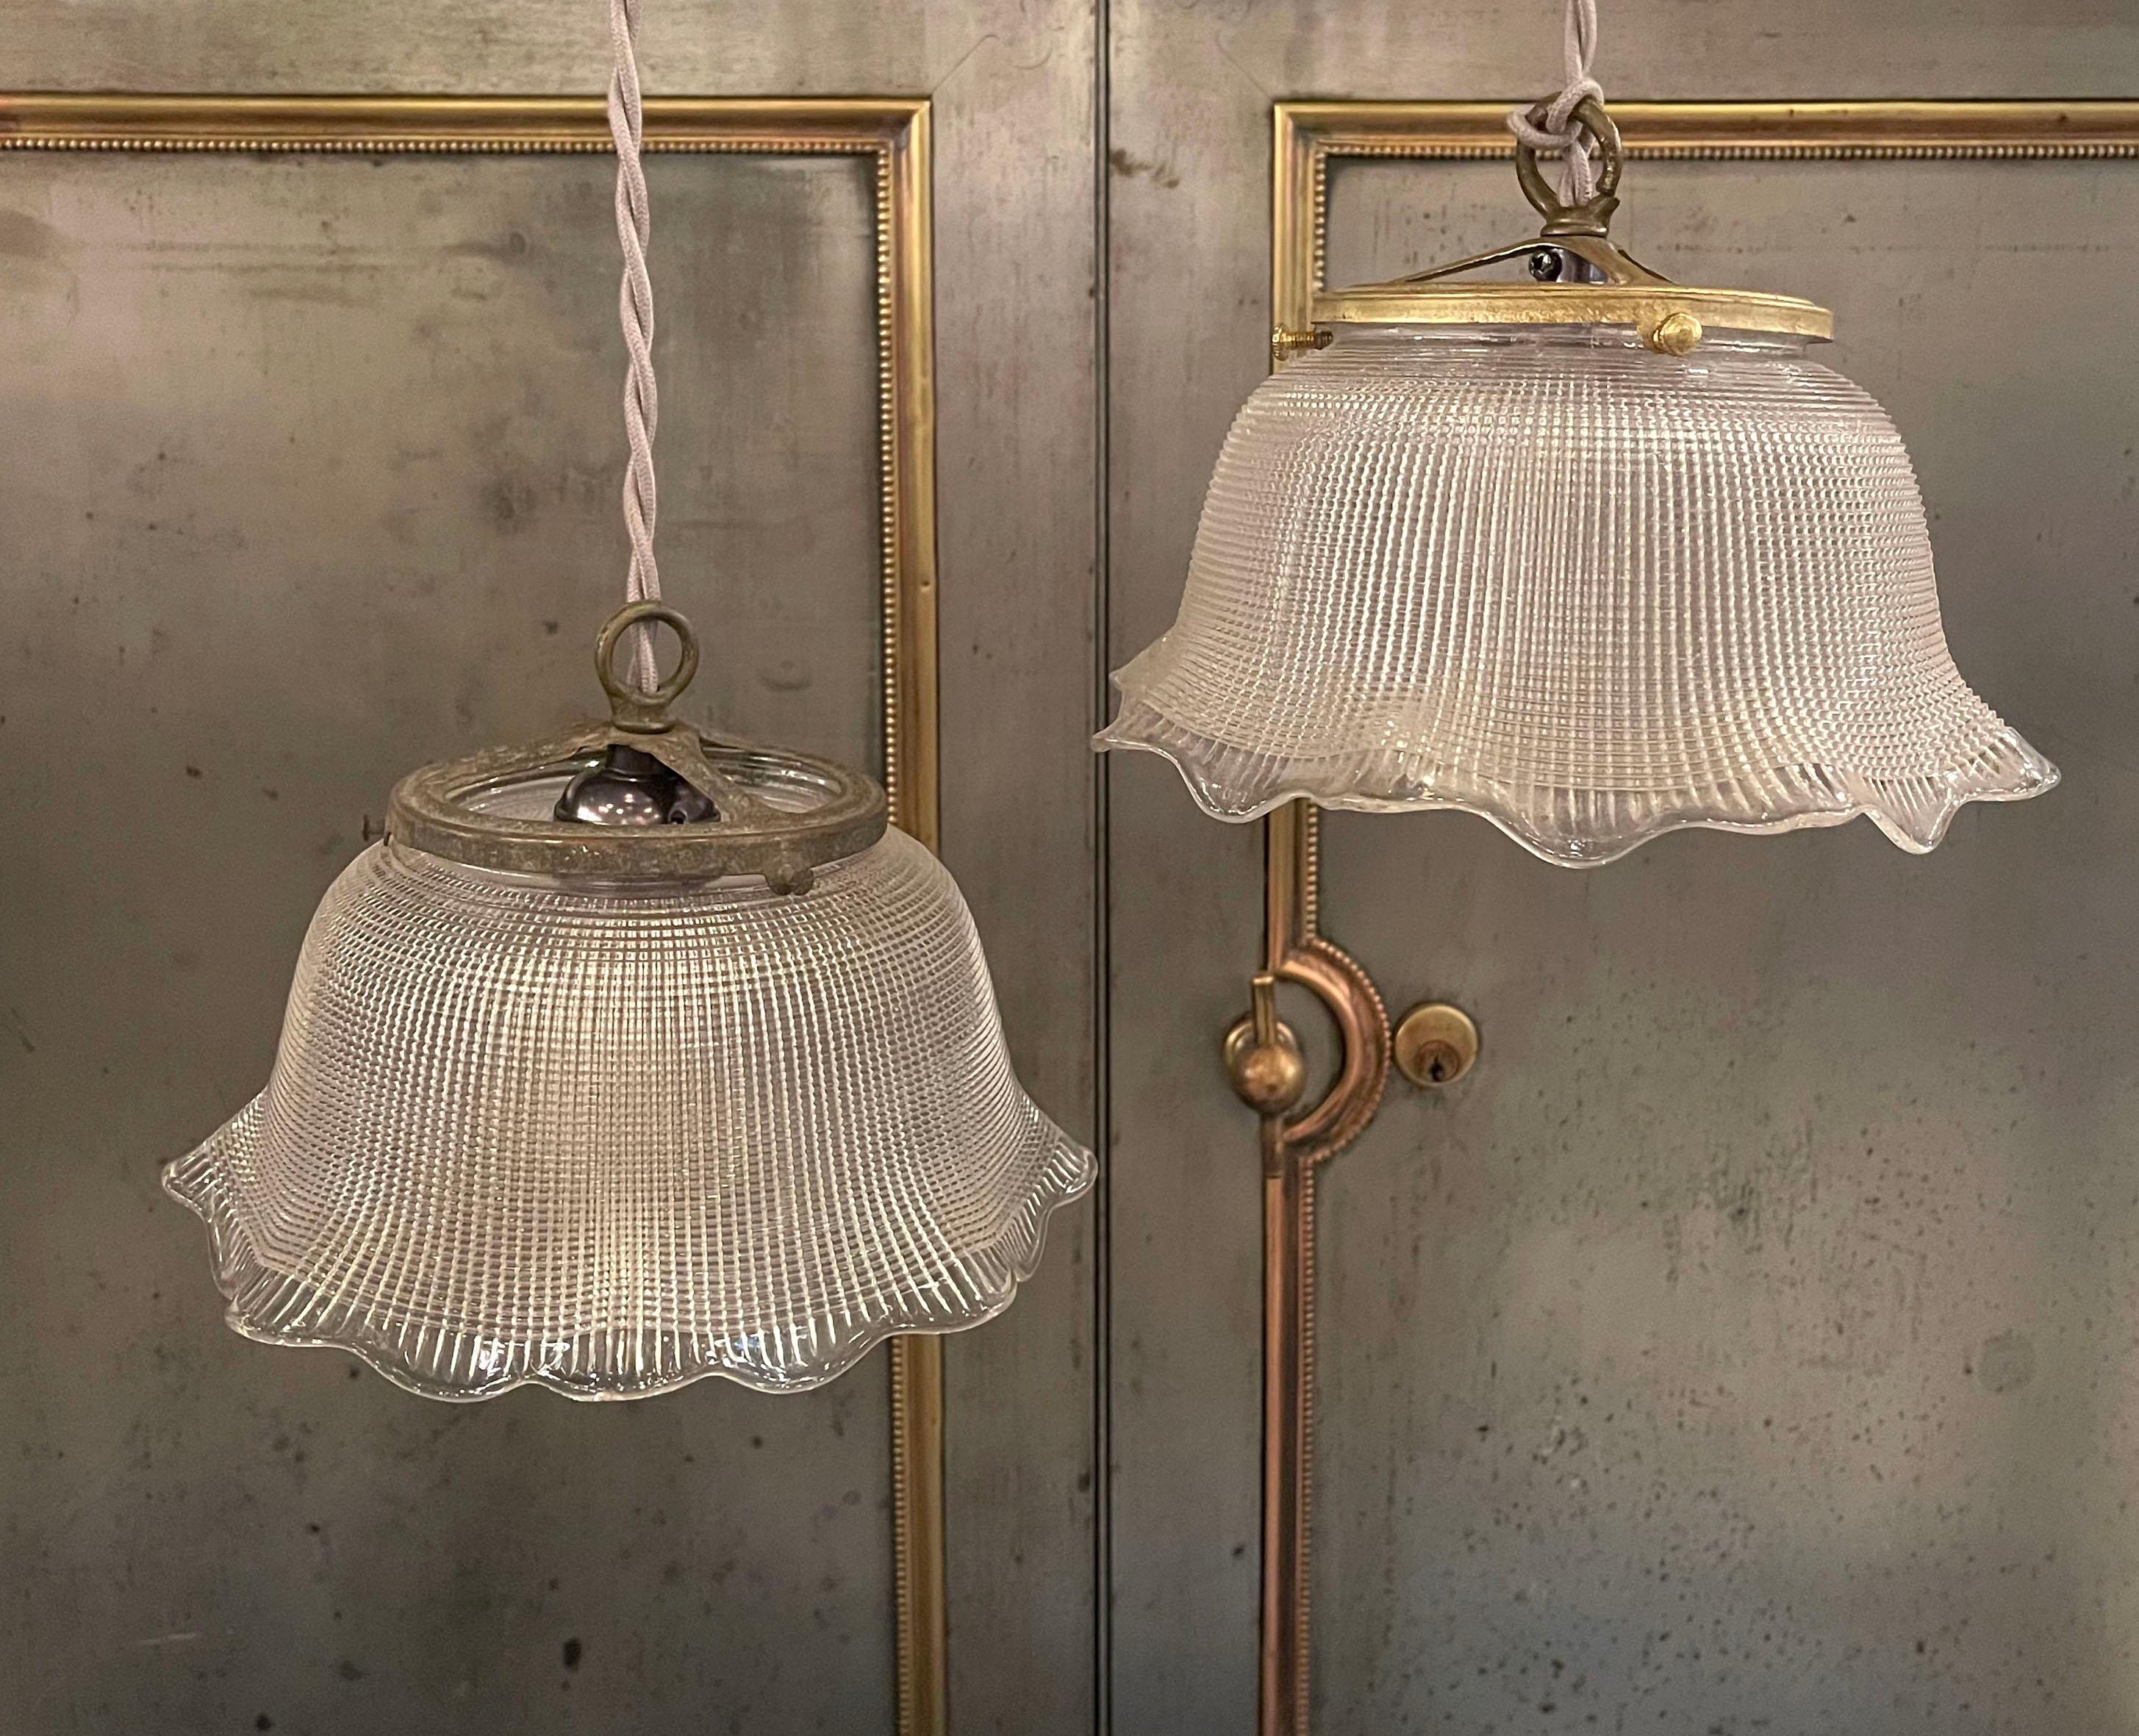 Industrial, ruffled bell-shaped, prismatic, Holophane glass pendant lights with brass fitters and sockets are newly wired with braided gray cloth cord. The pendants hang at an overall height of 80.5 inches. 2 pendants are available, sold